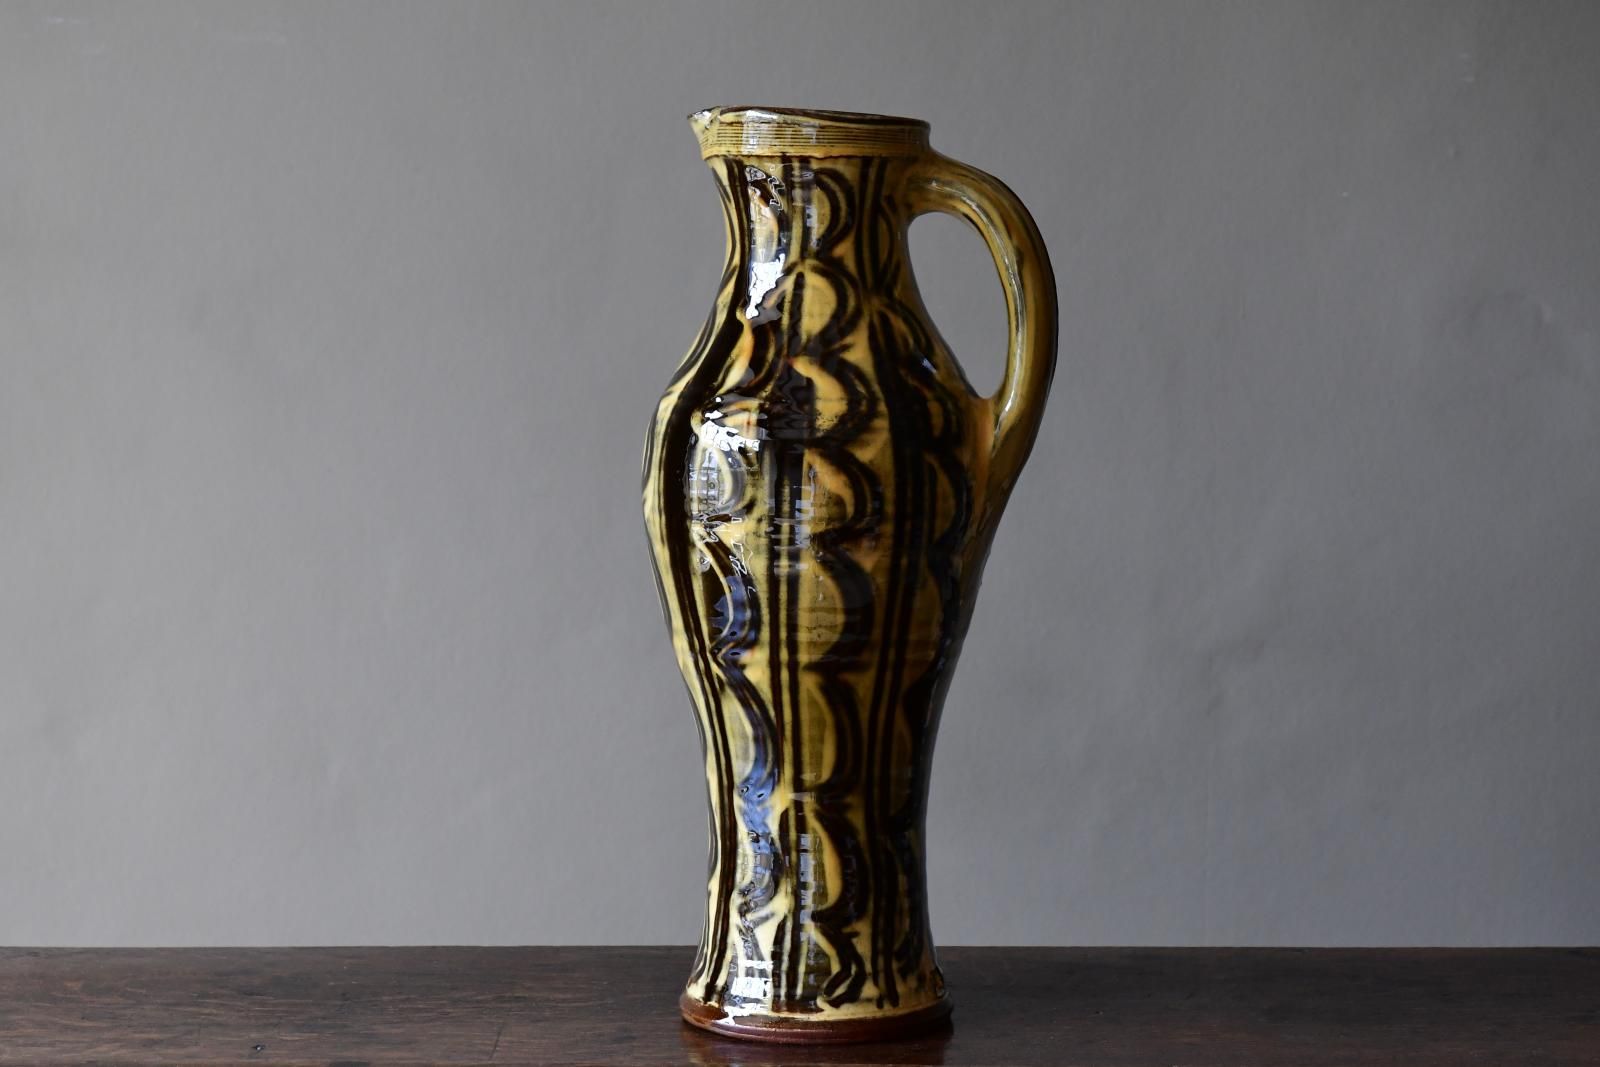 Combed Baluster Jug, Yellow over Black by Doug Fitch